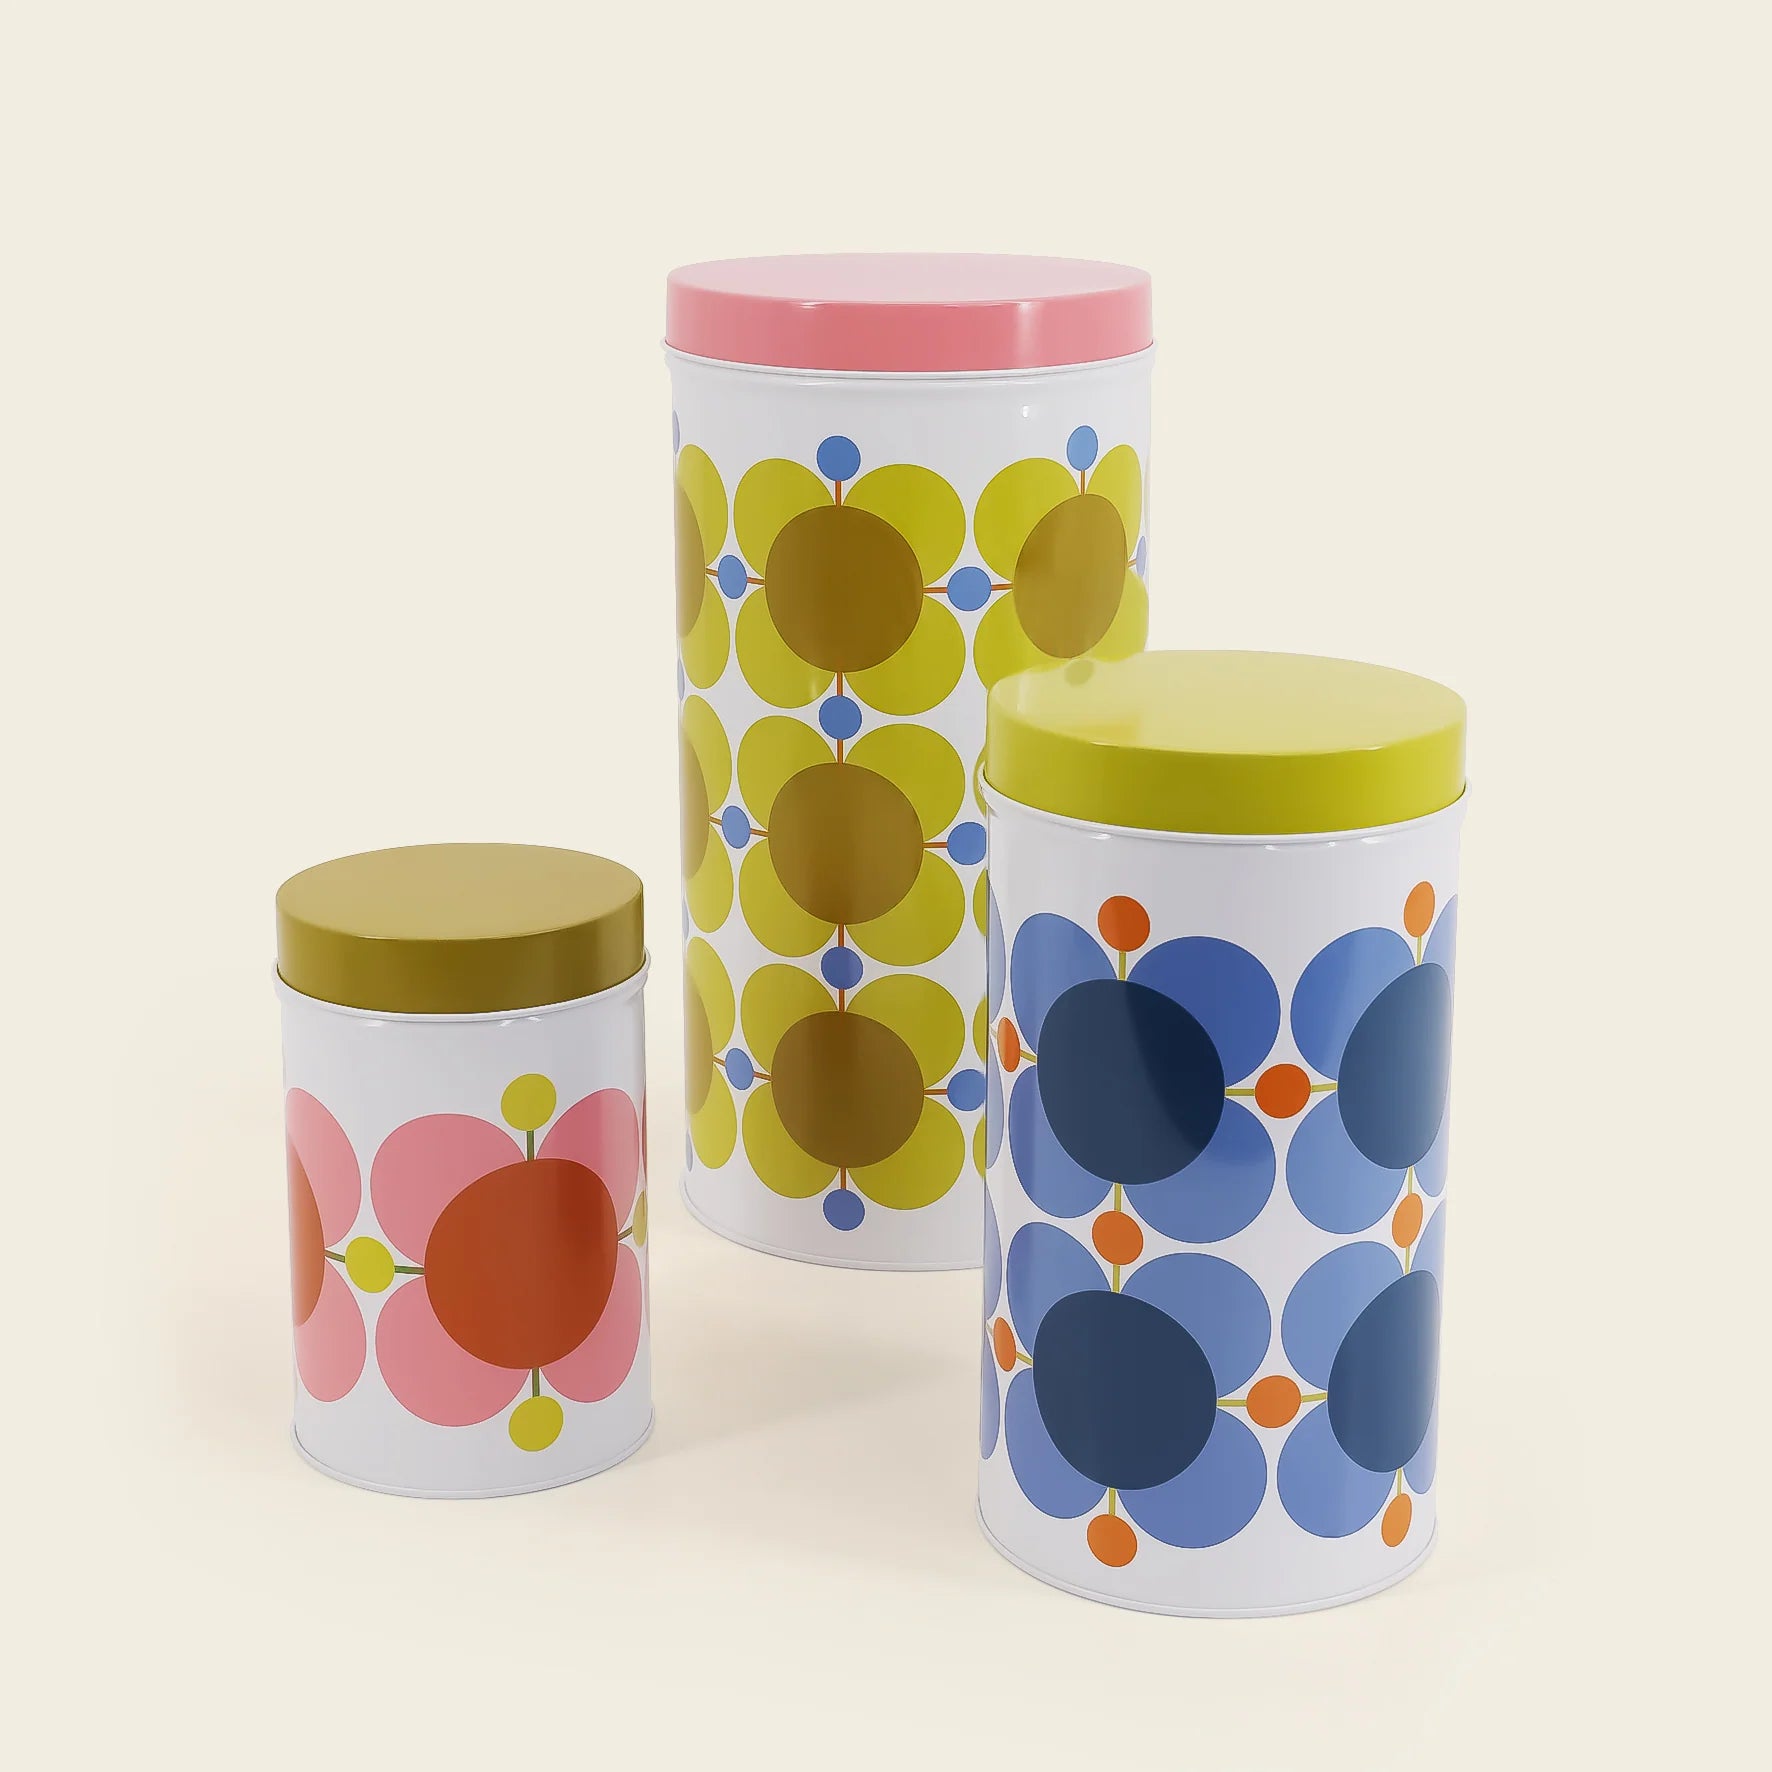 Fab Gifts | Orla Kiely Atomic Flower Nesting Cake Tins Set Of 3 by Weirs of Baggot Street